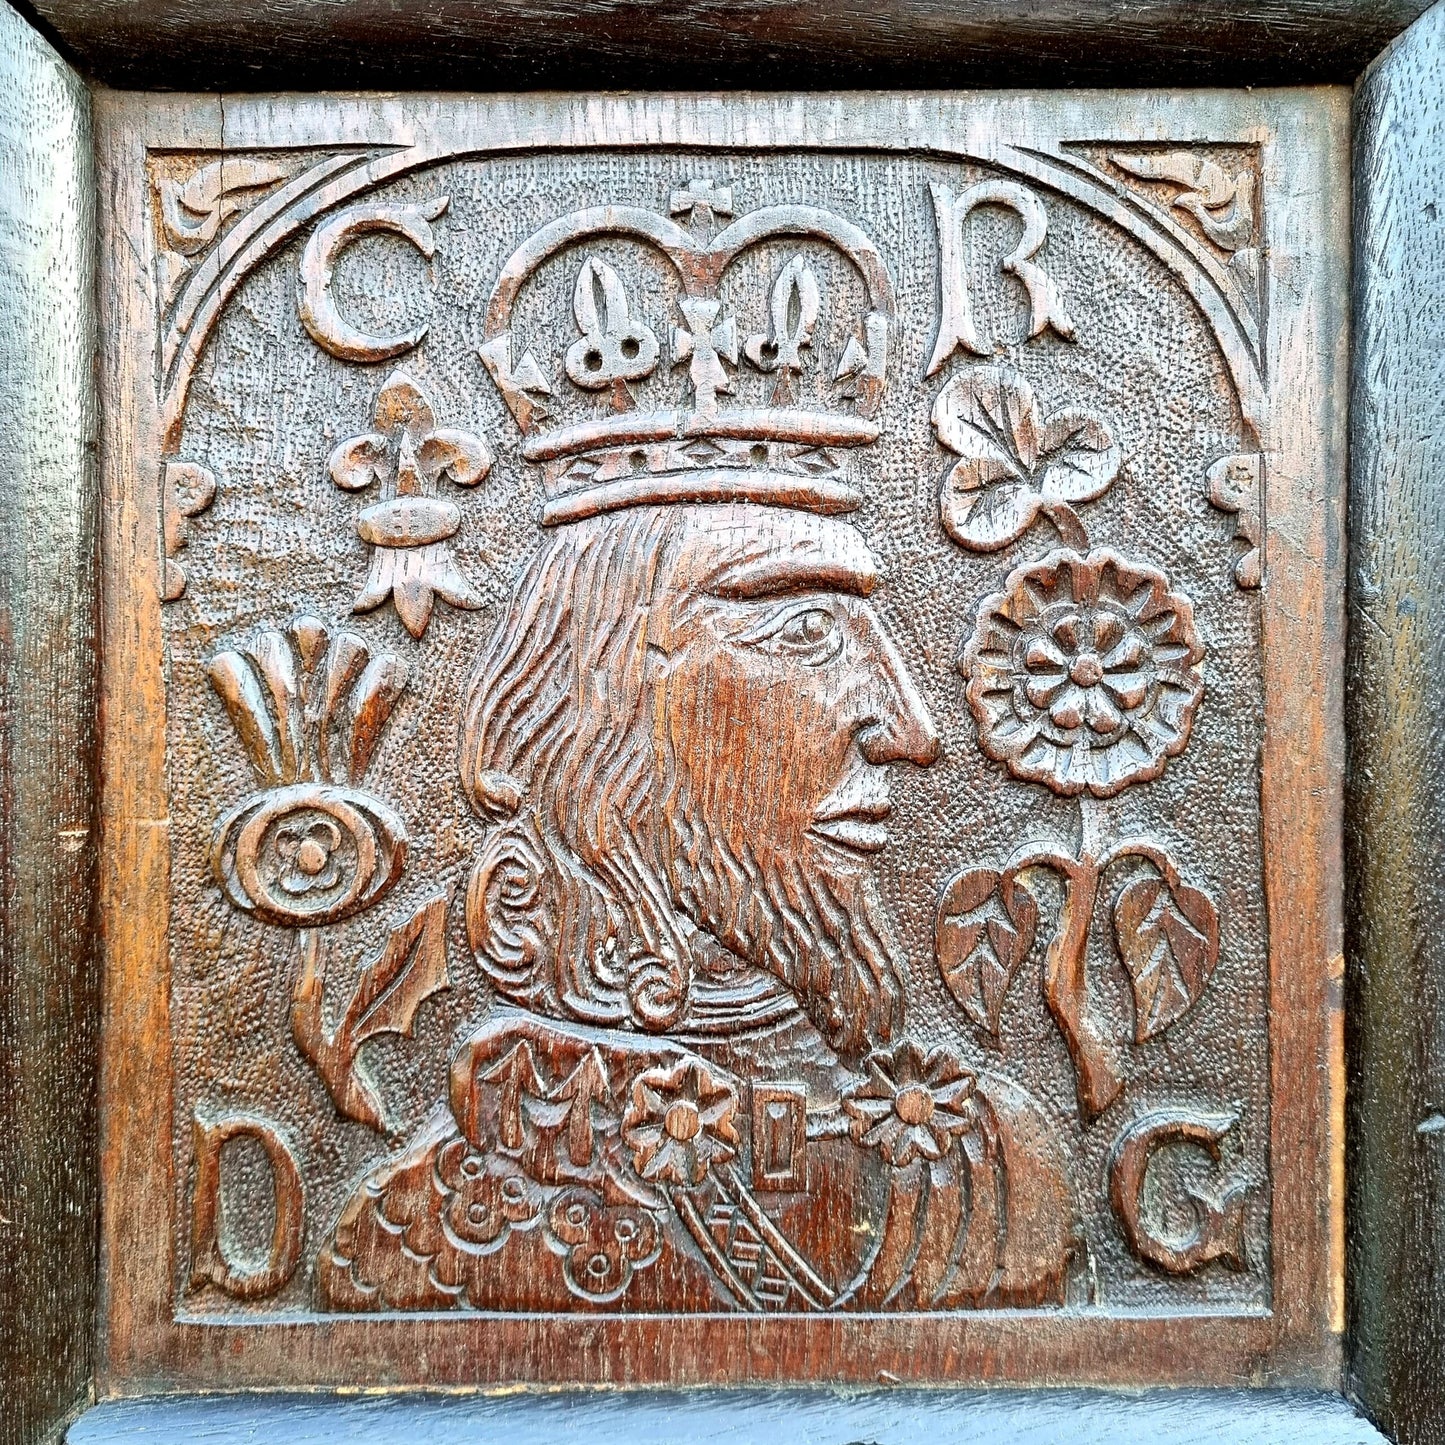 Rare 17th Century English Antique Carved Oak Portrait Panel Depicting King Charles I, Dated 1632